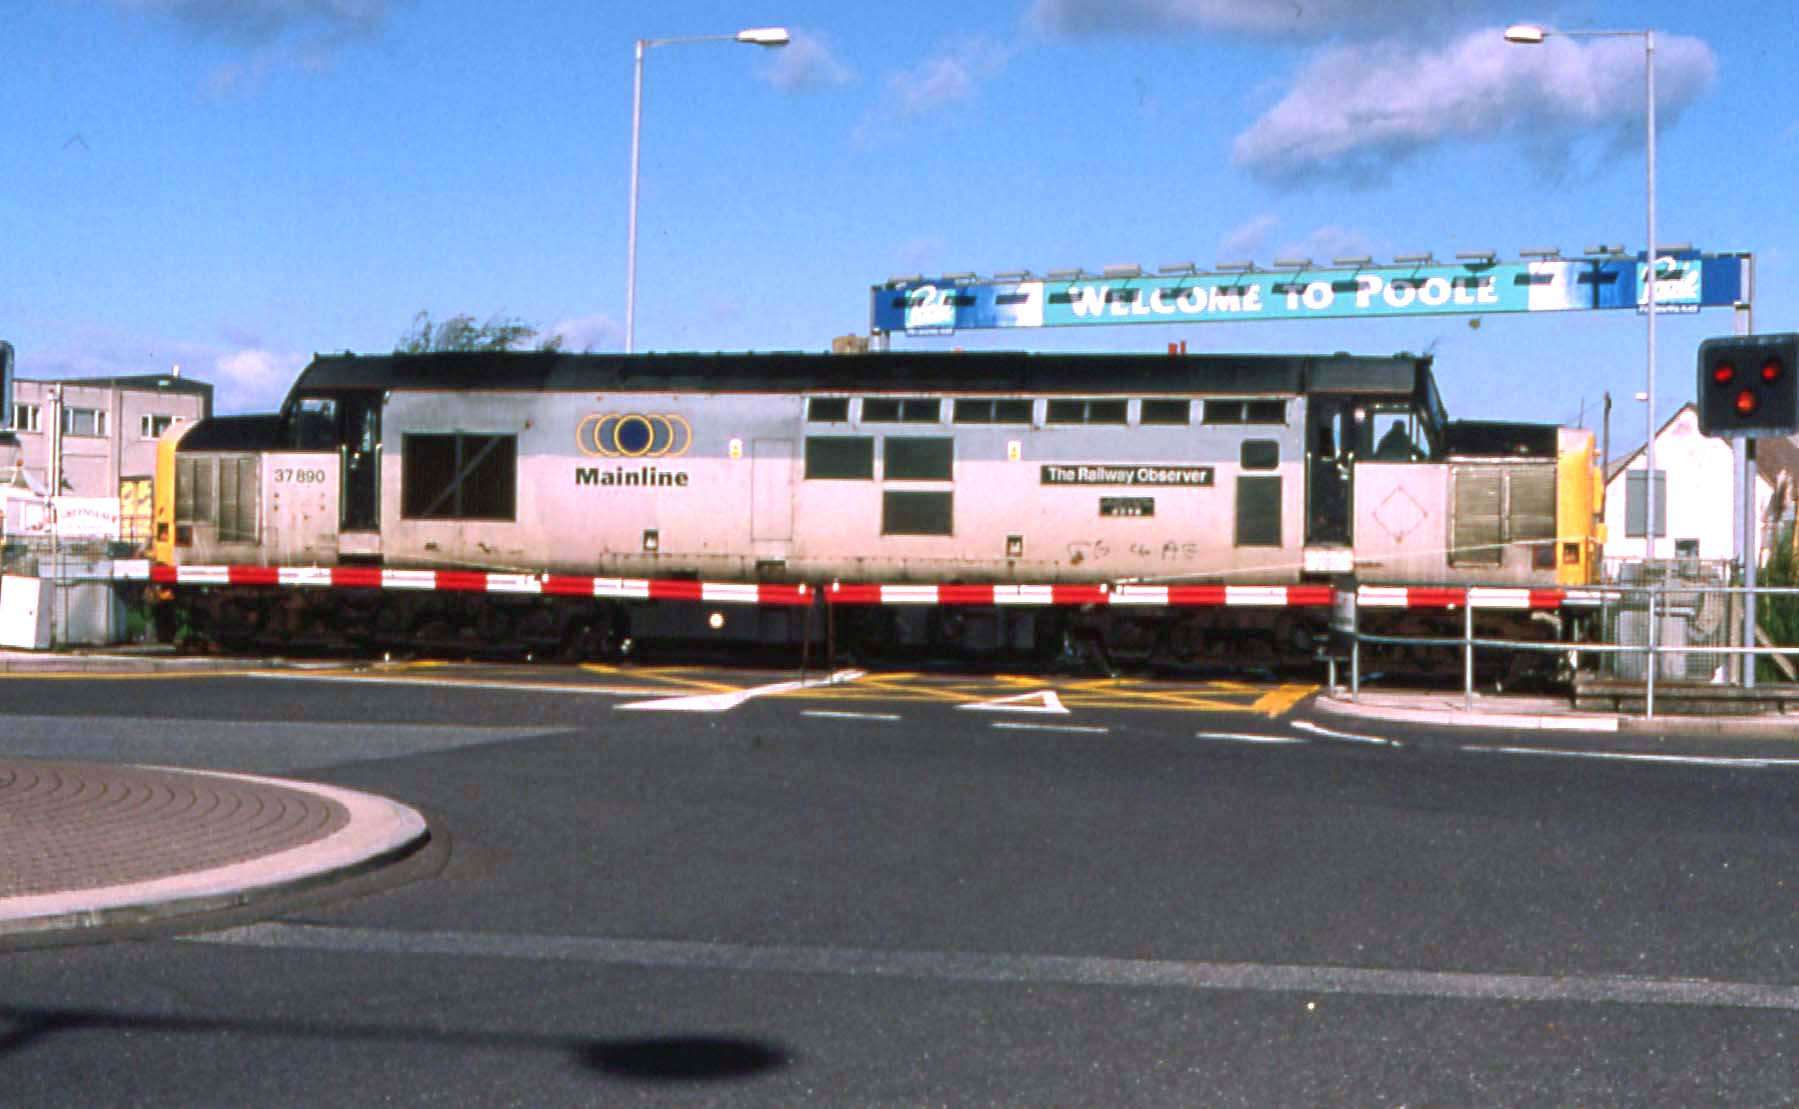 37890 running round on Hamworthy branch, 17th October 1998. The level crossing is the main road entrance for the cross channel ferry port, hence the “Welcome to Poole” sign in the background. Martyn Thresh